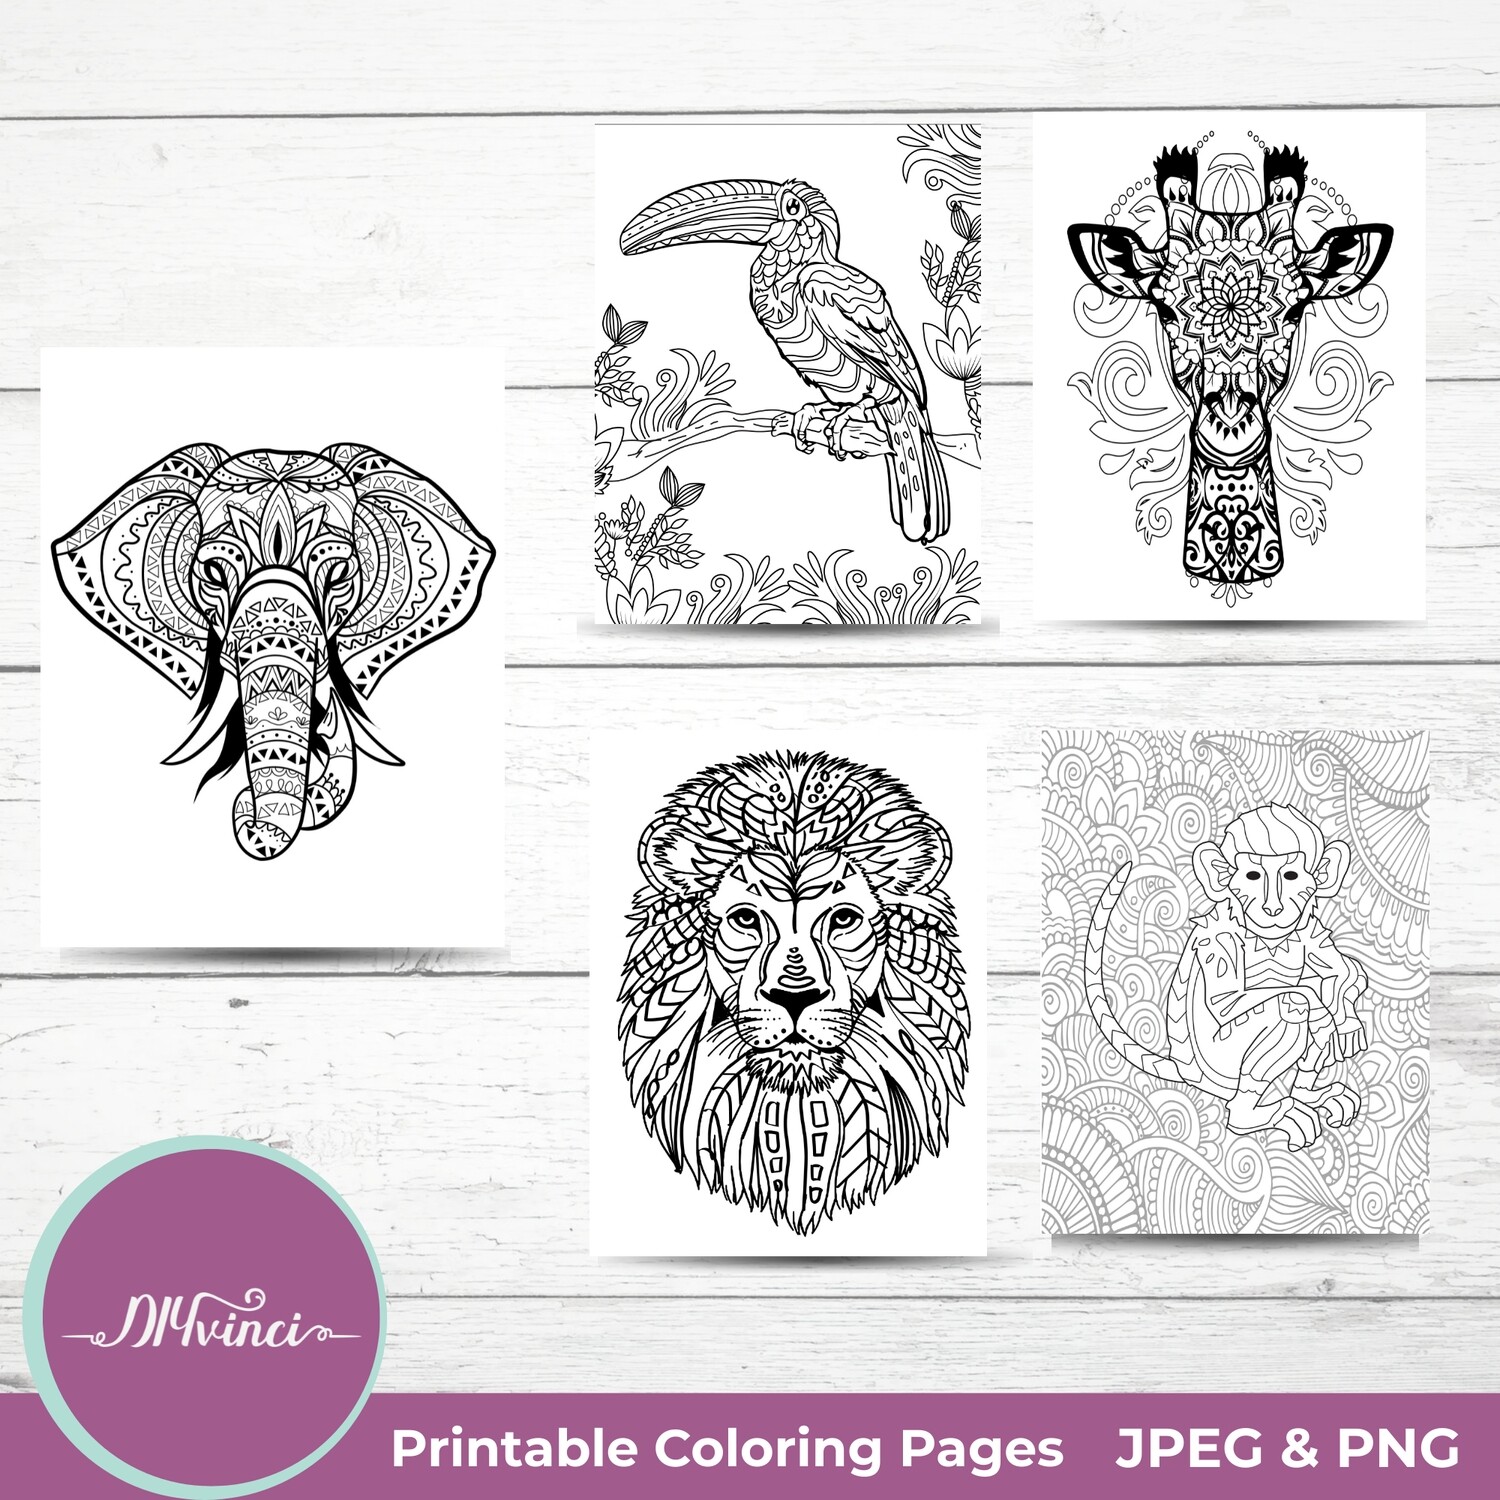 Safari Printable Coloring Pages - 5 JPEG & PNG - Personal and Commercial Use